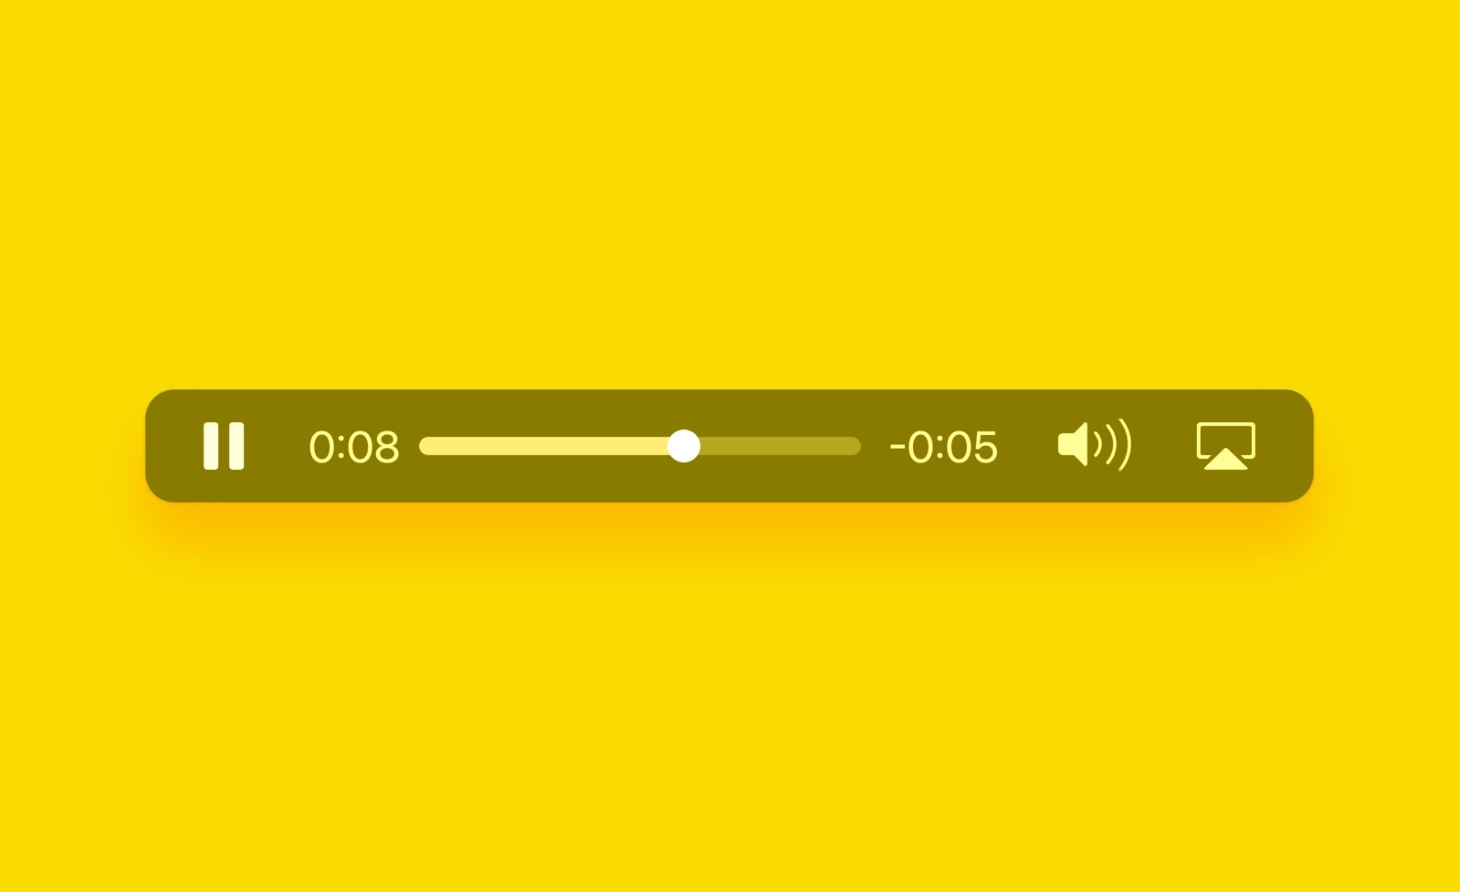 Audio Player package that is available on framer